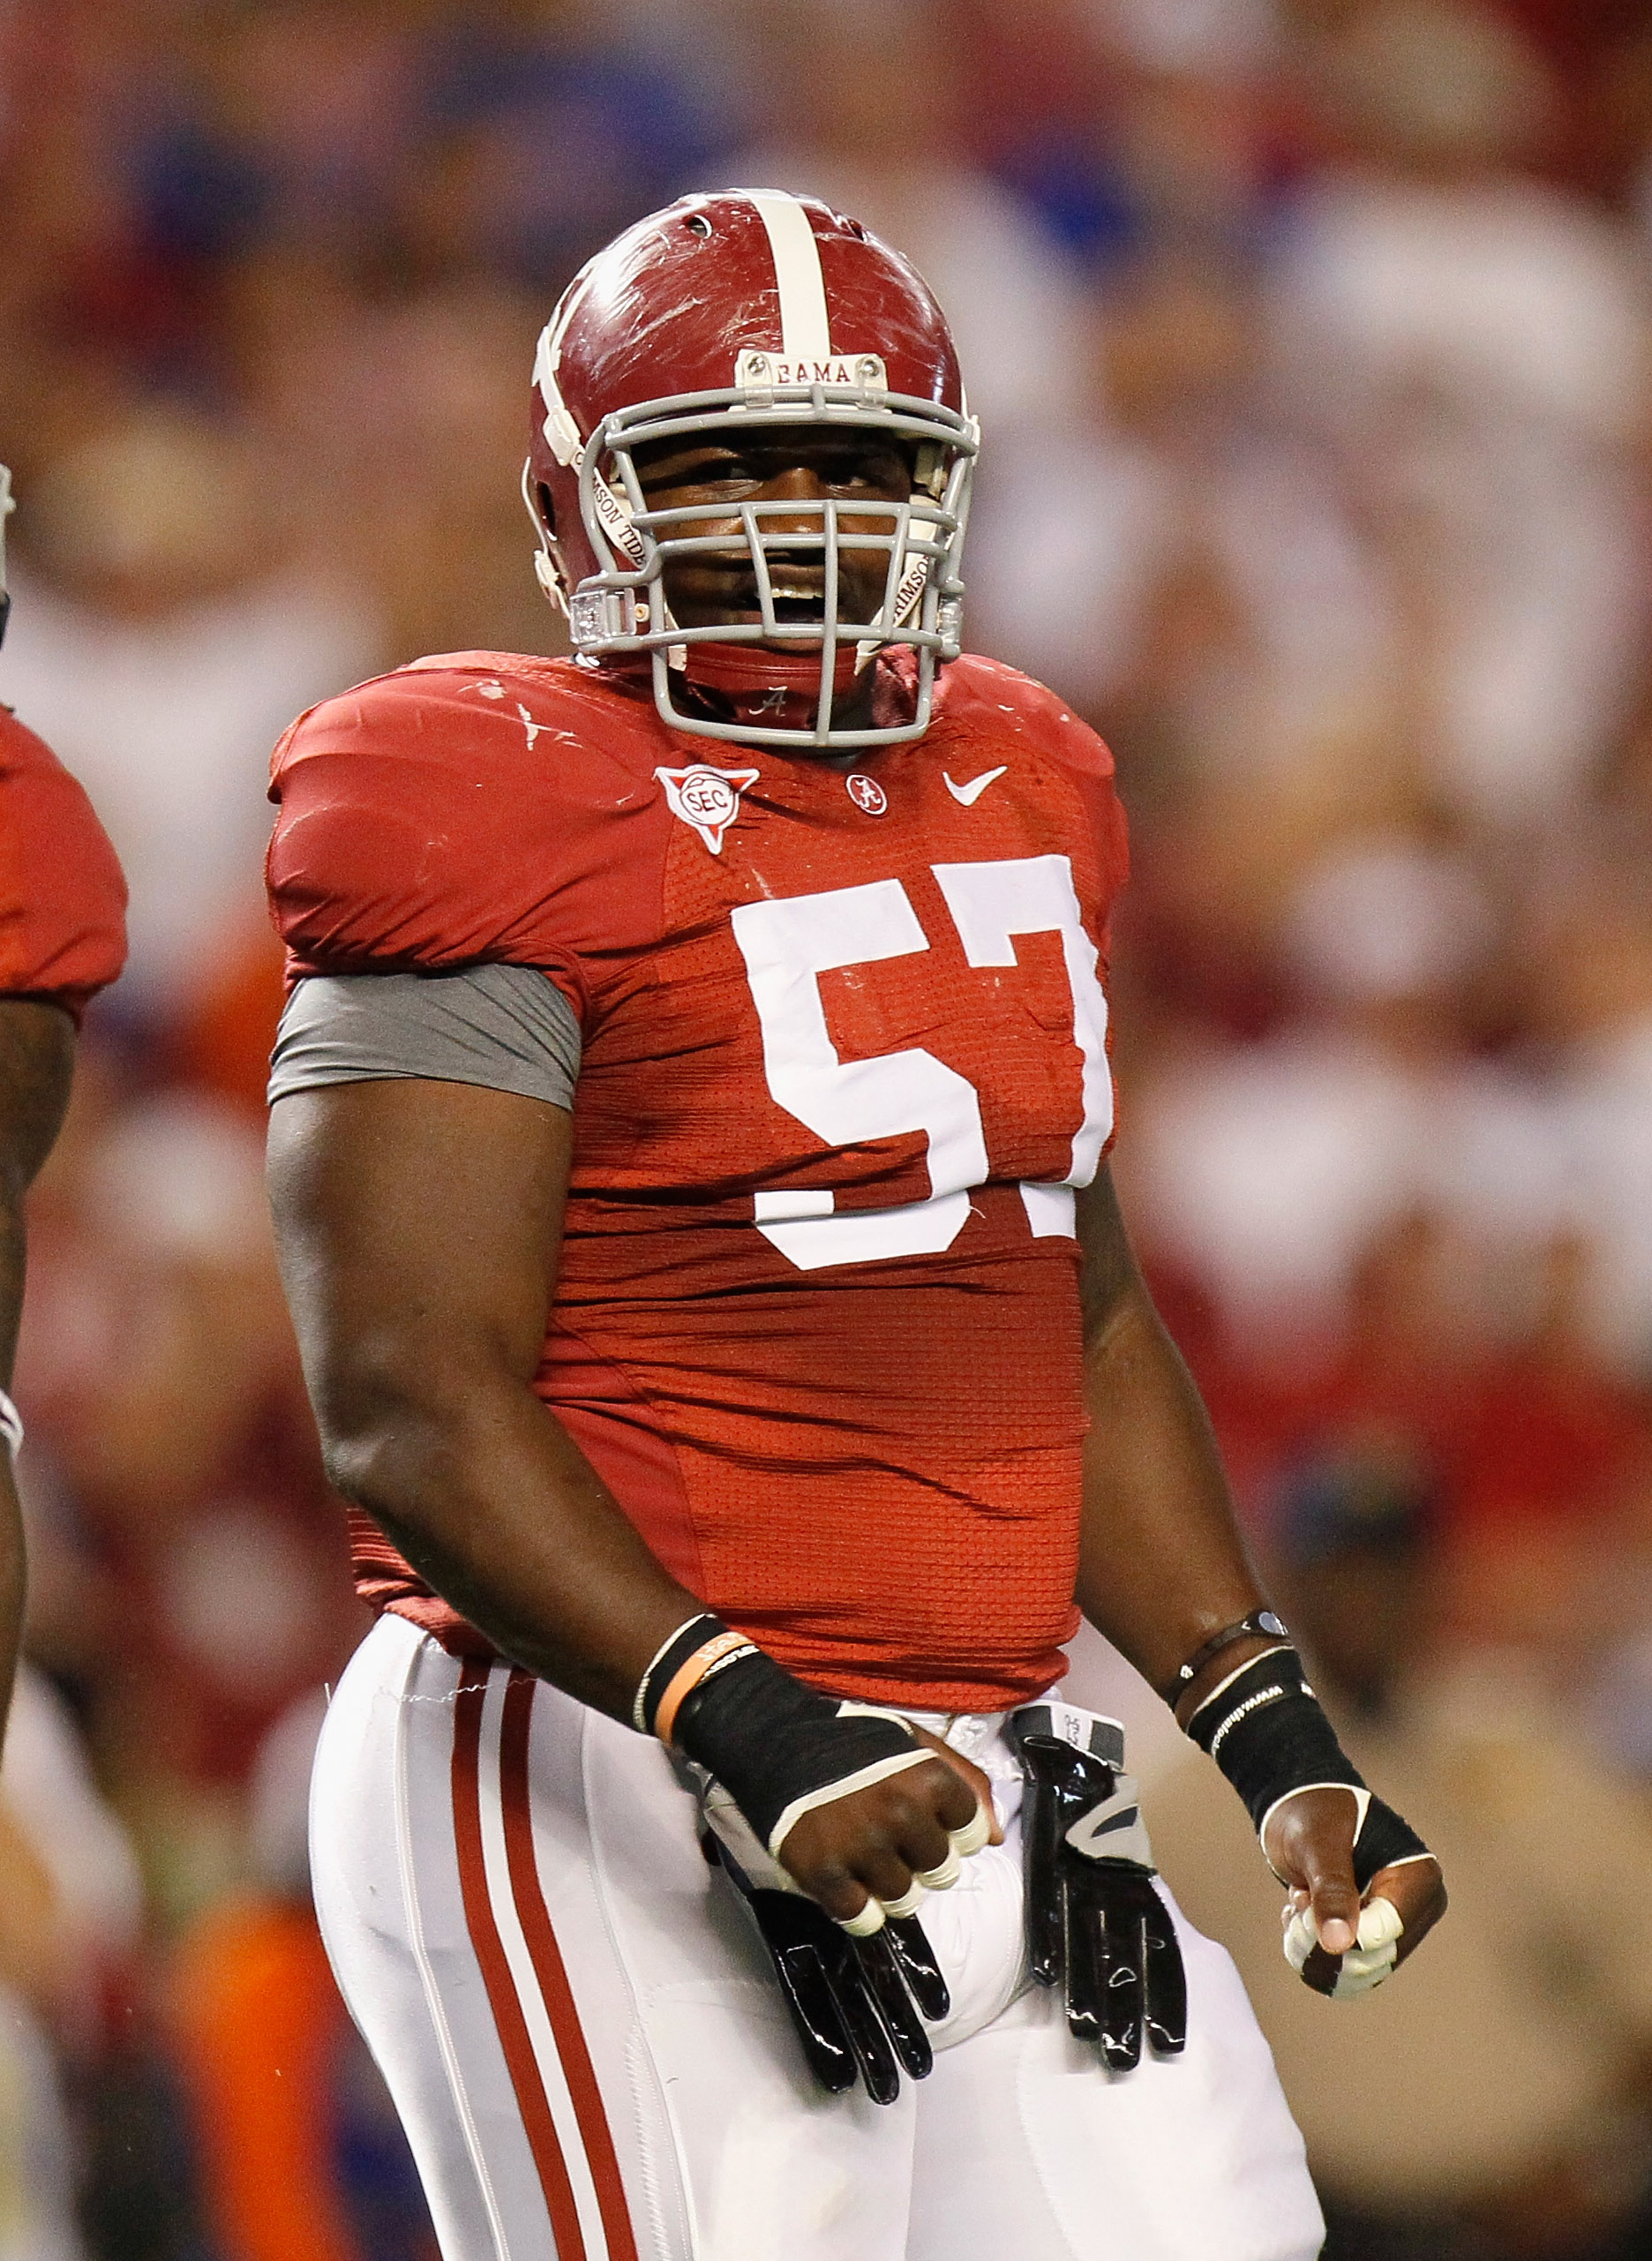 TUSCALOOSA, AL - OCTOBER 02:  Marcell Dareus #57 of the Alabama Crimson Tide against the Florida Gators at Bryant-Denny Stadium on October 2, 2010 in Tuscaloosa, Alabama.  (Photo by Kevin C. Cox/Getty Images)